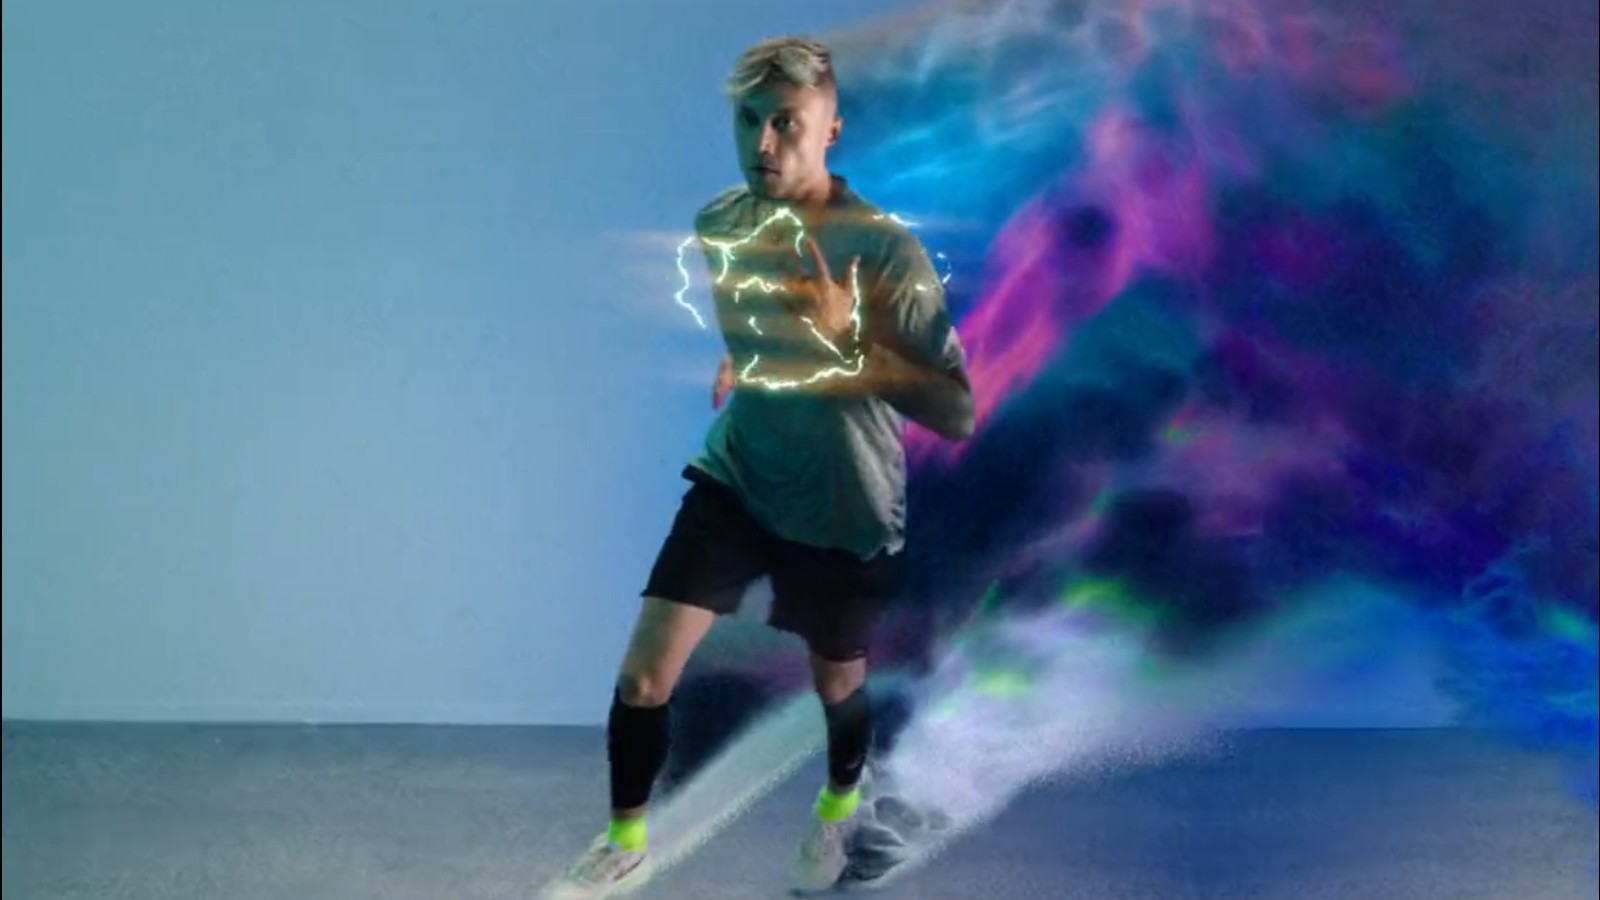 Nike unveils partnership with League of Legends star Rekkles - Dexerto